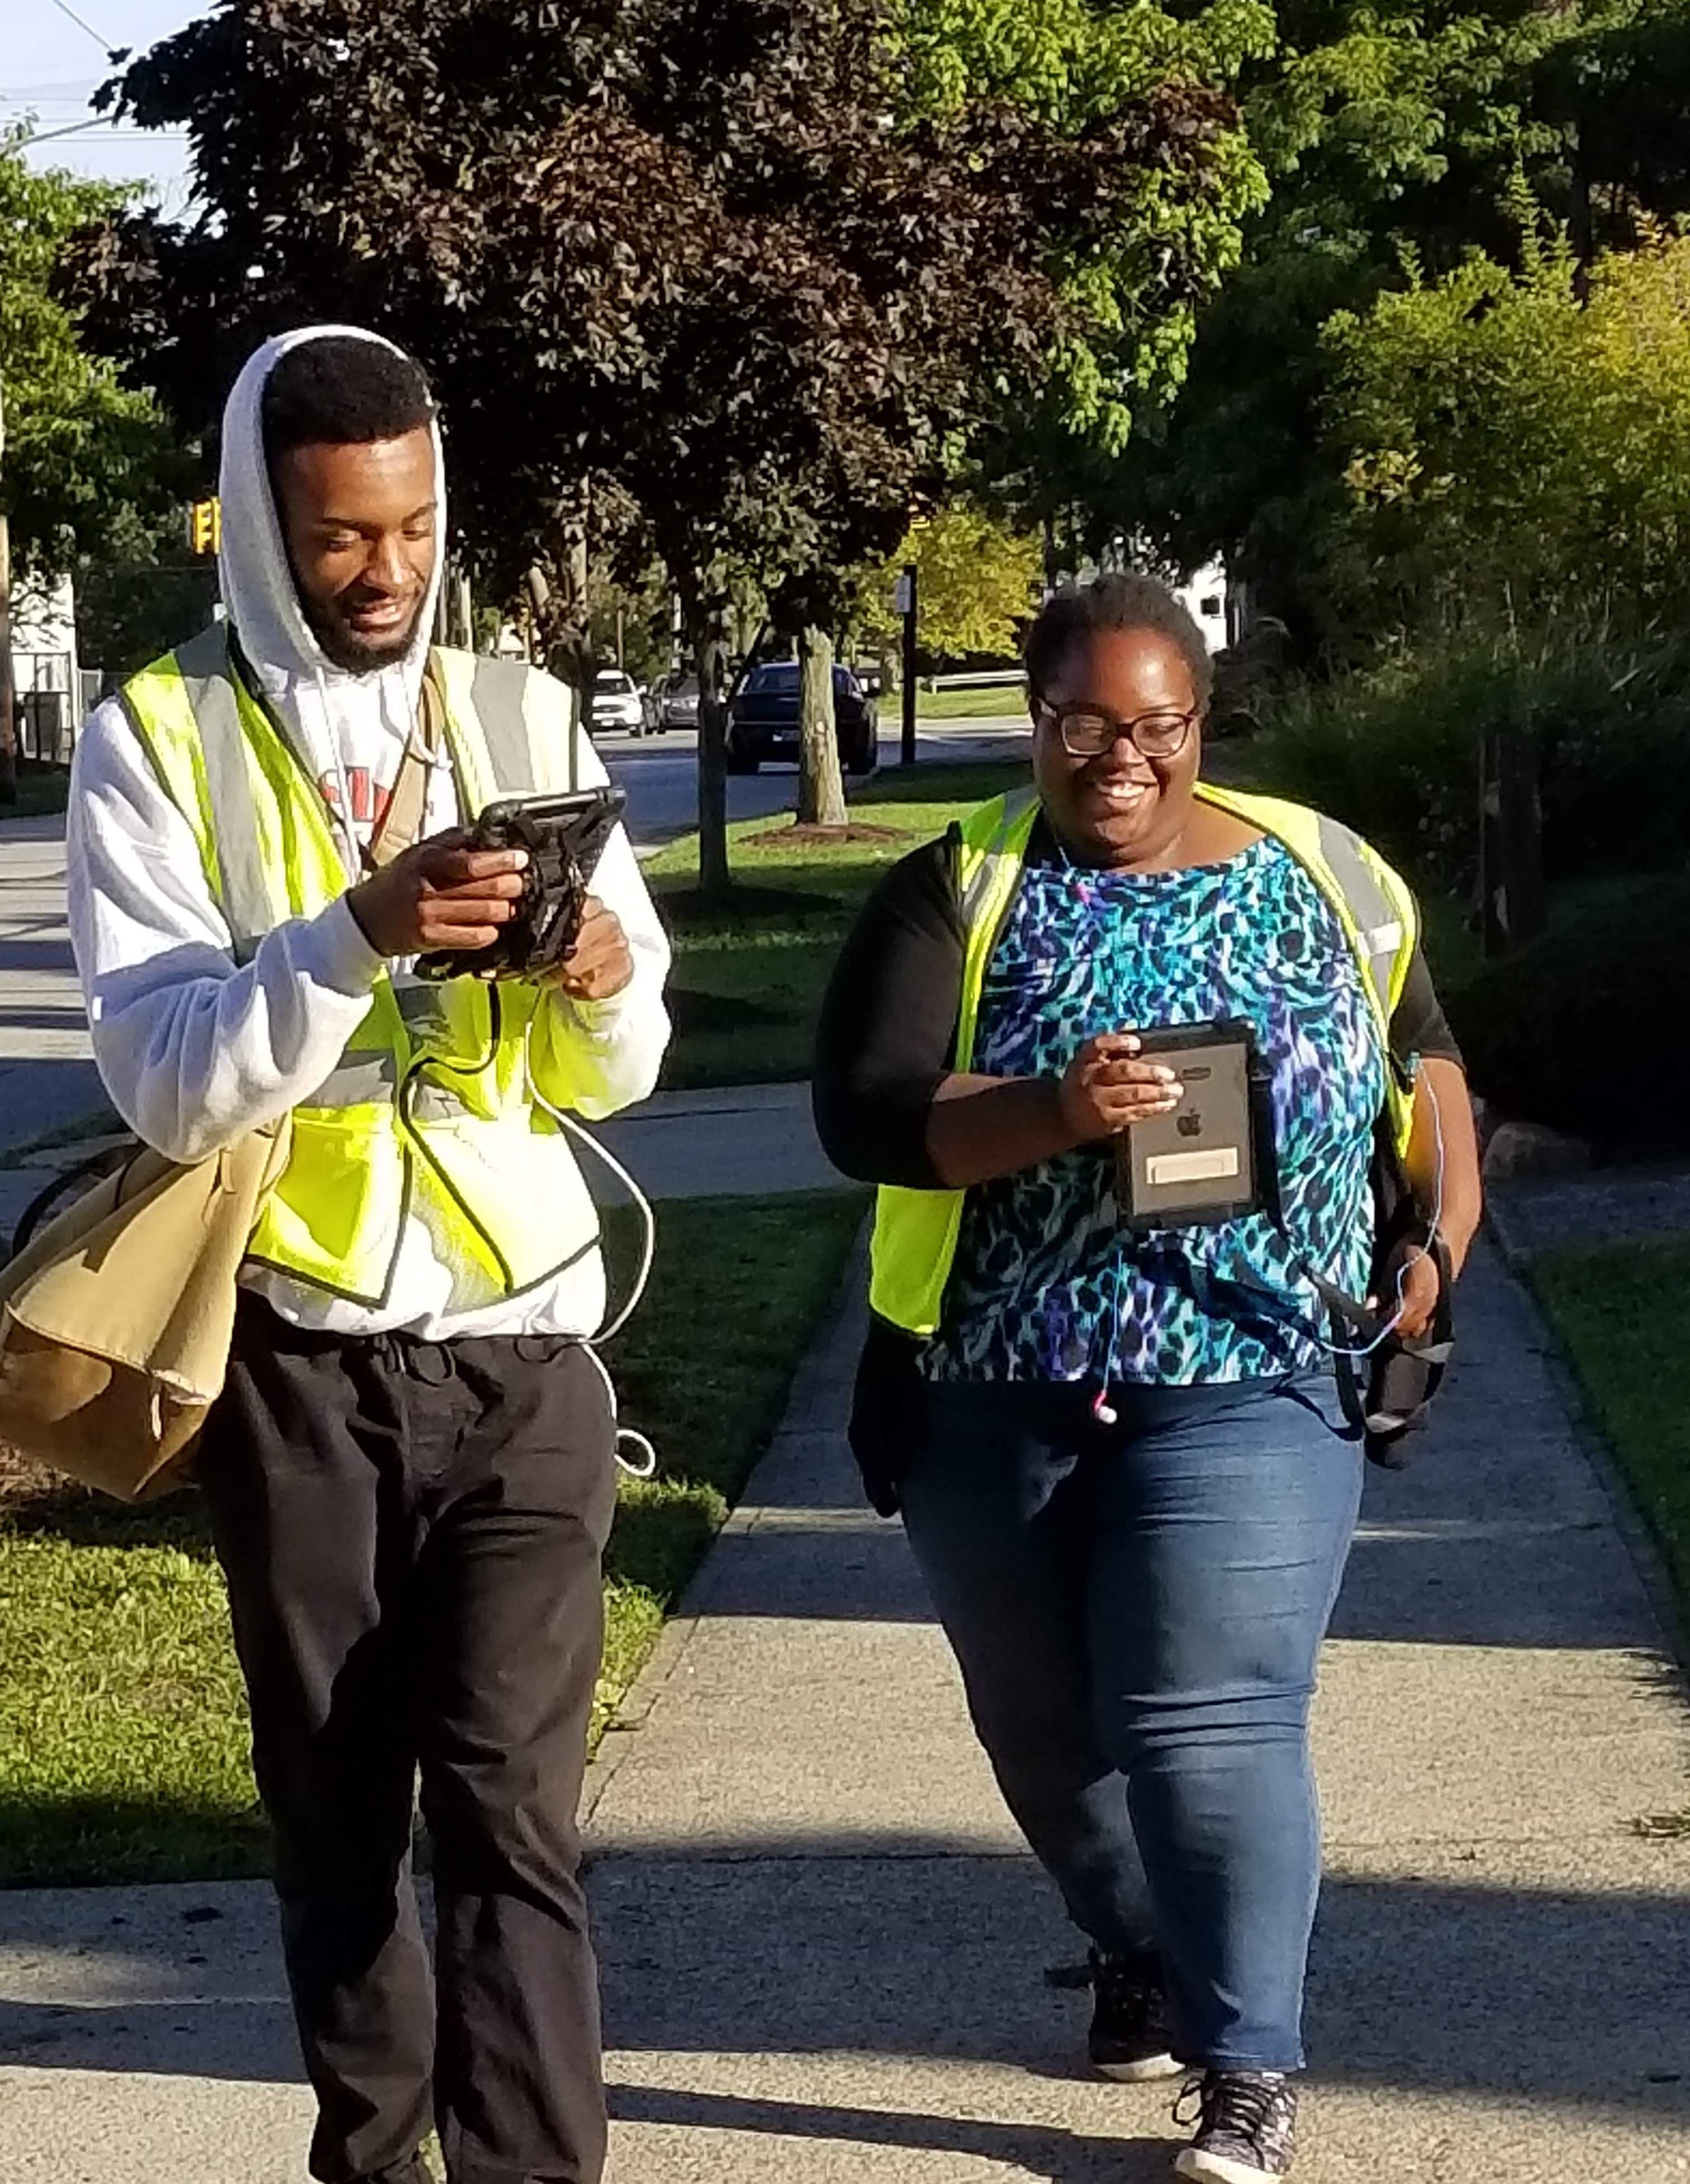 Two surveyors walk down the sidewalk while laughing and looking at the Regrid Mobile App